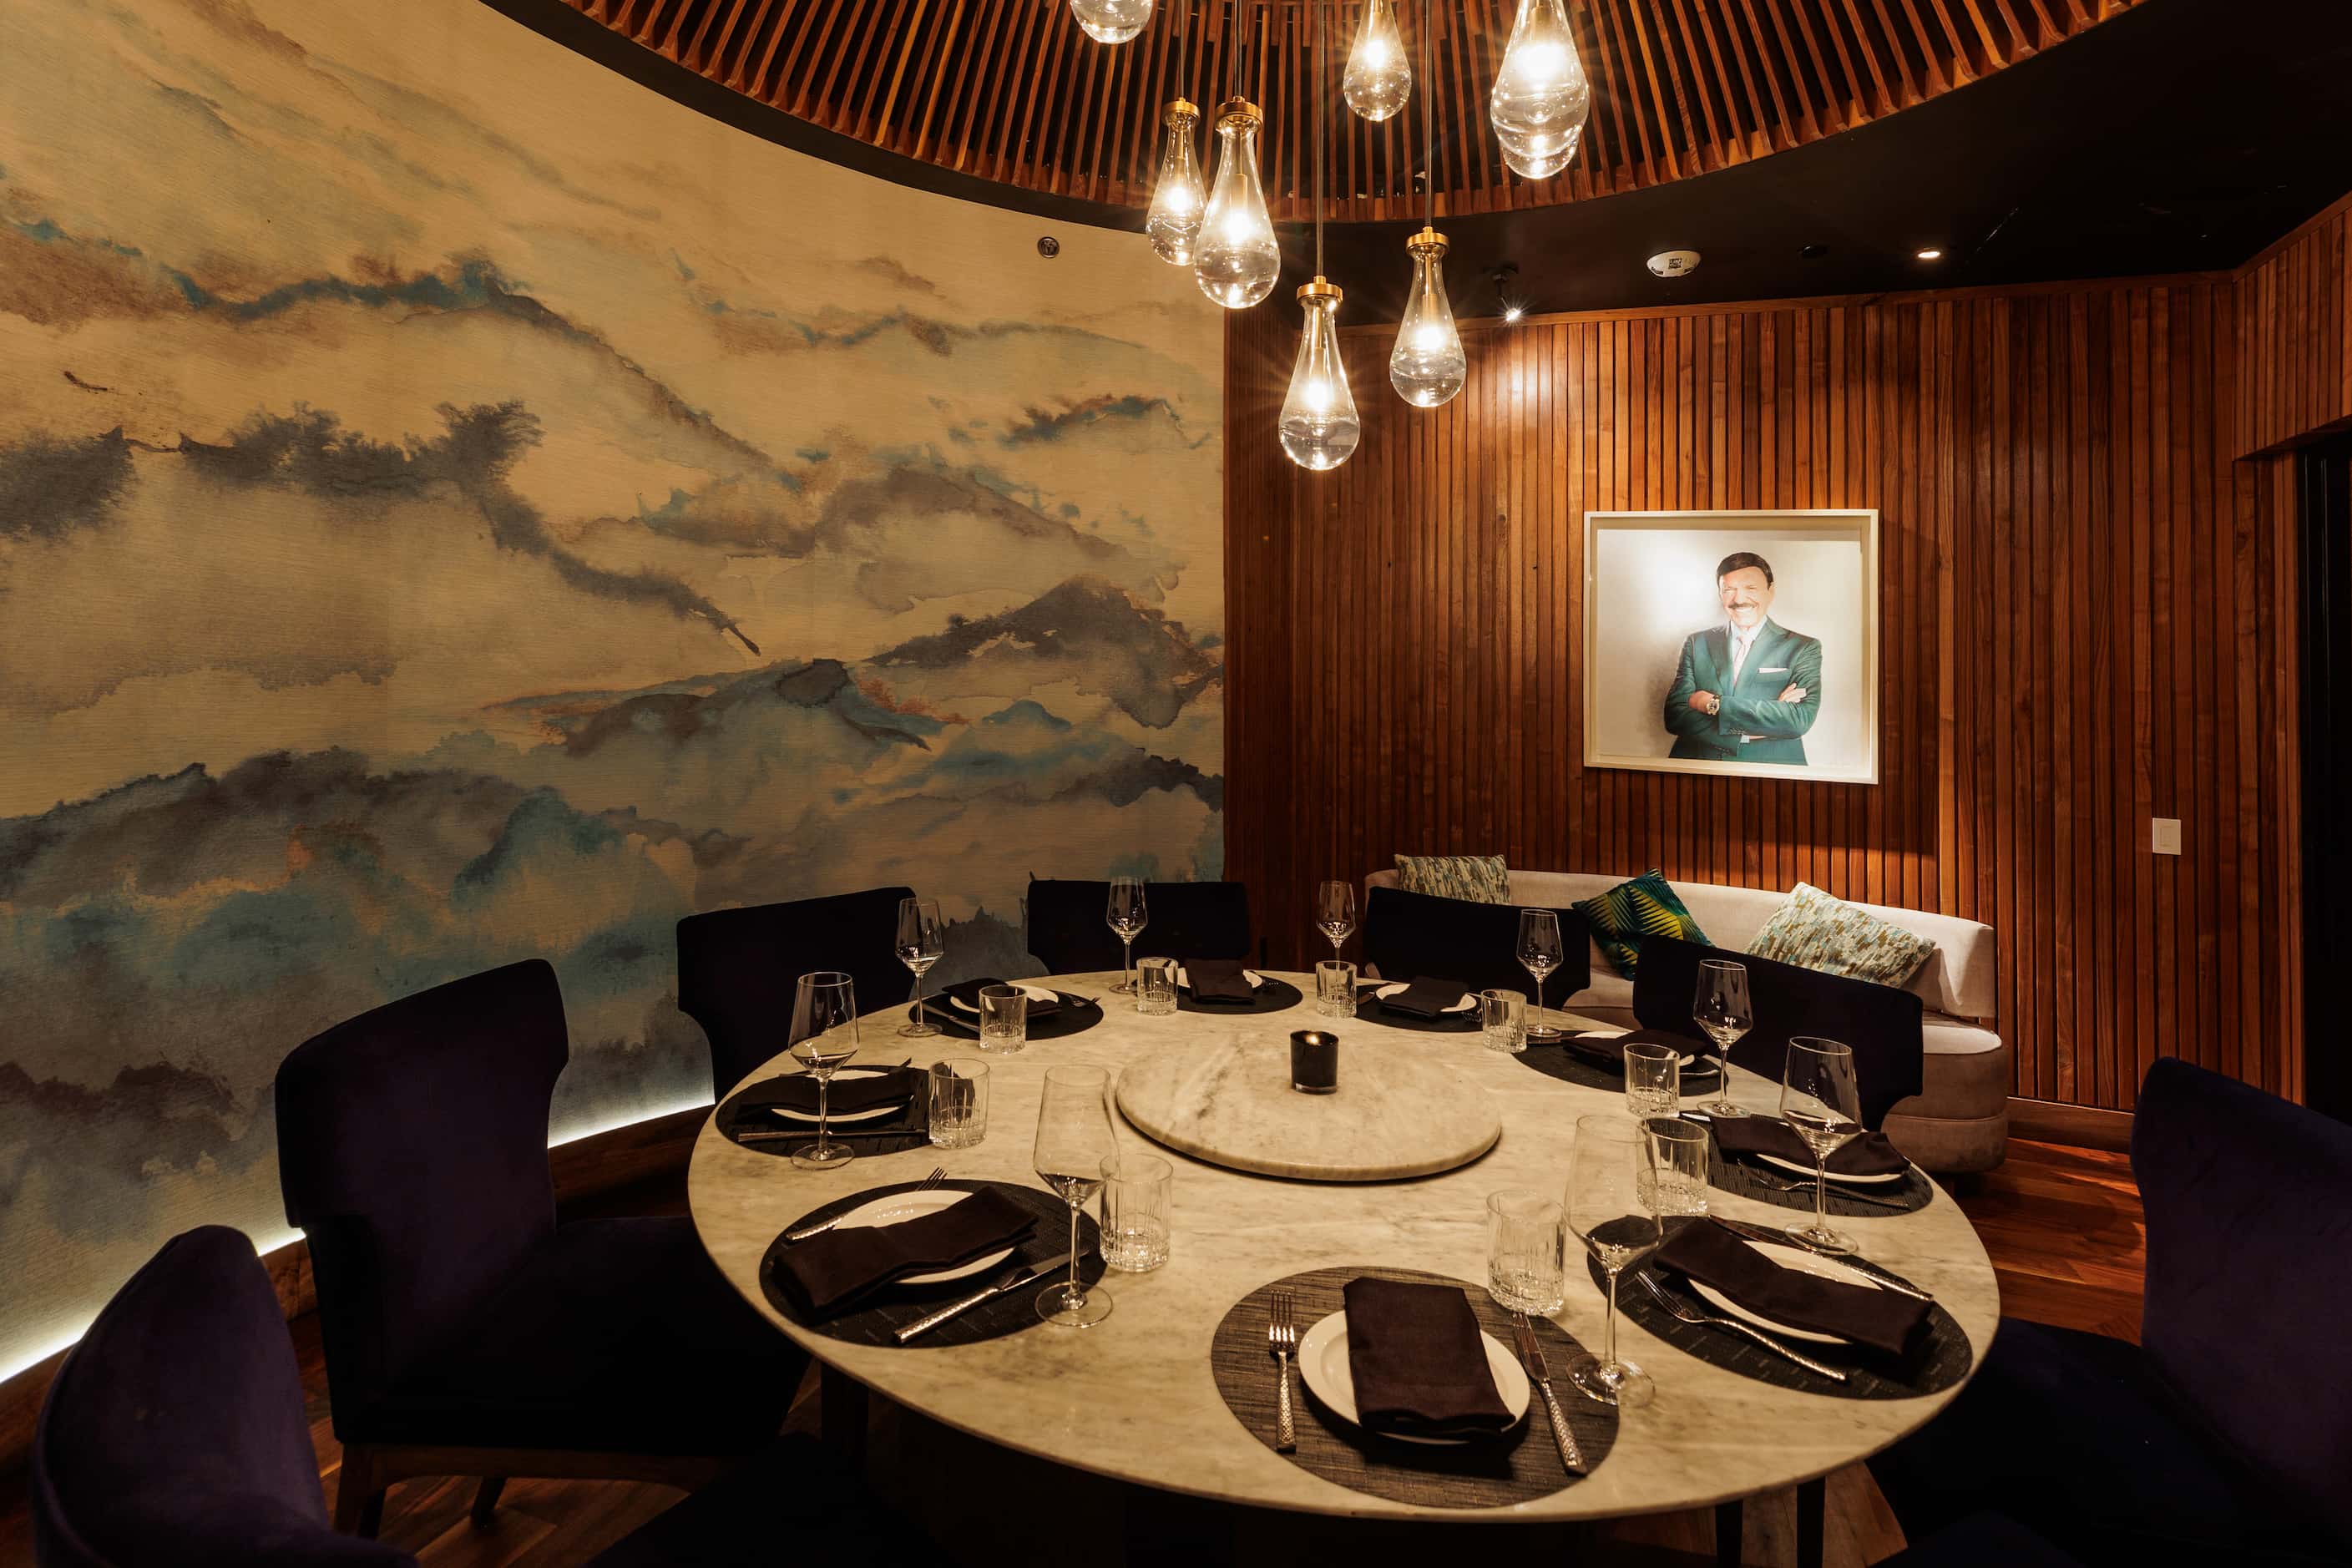 Near the bar at The Mexican is a circular private room with a wall of art.